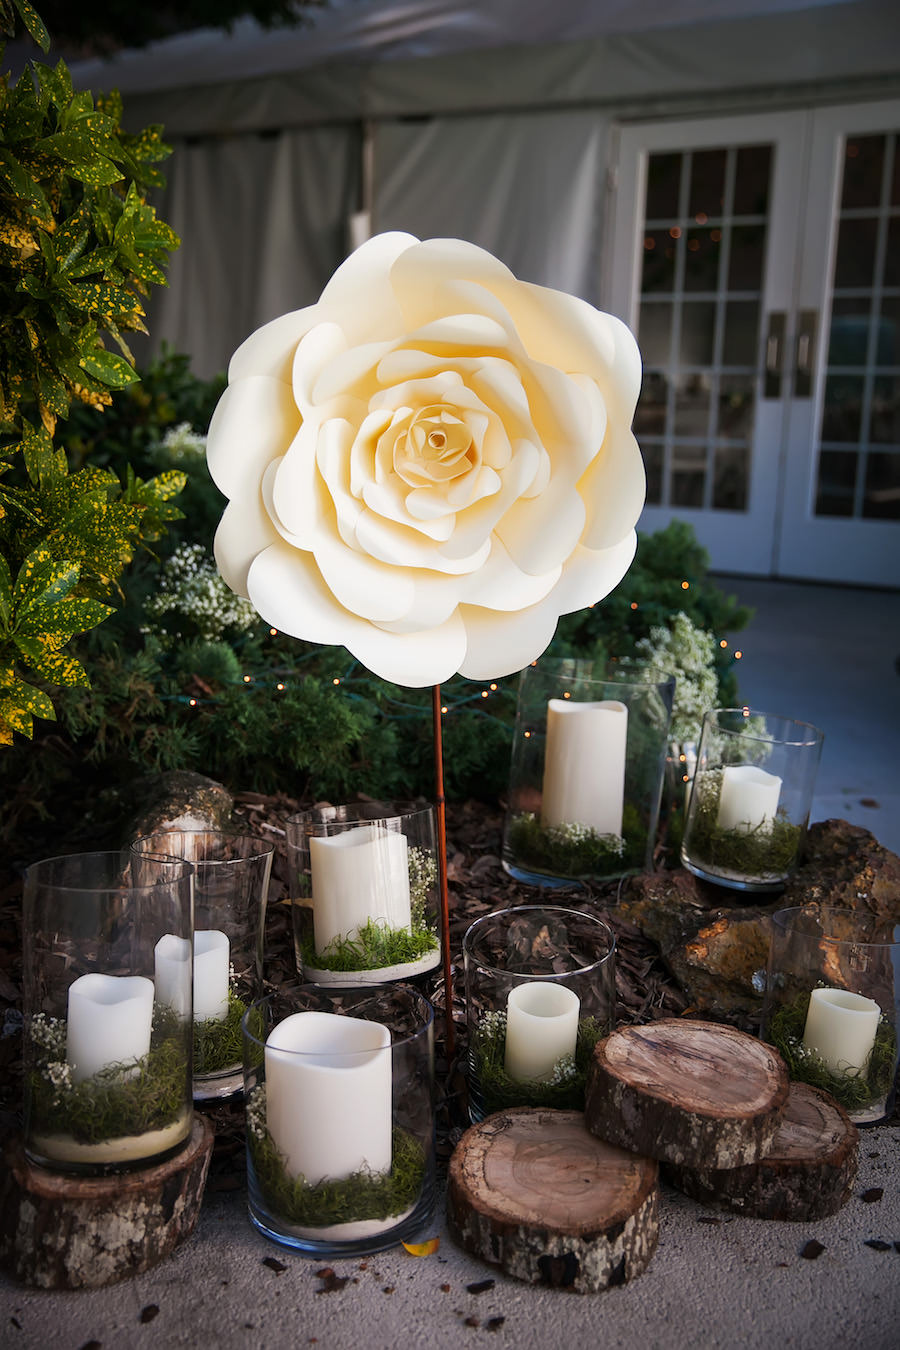 Paper, Floral Decor at Outdoor Waterfront Garden Wedding Ceremony | Mid-Summer's Night Dream Whimscial Wedding | Wedding Reception Decor with Wooden Slabs, Candles, and Oversized Paper Flowers